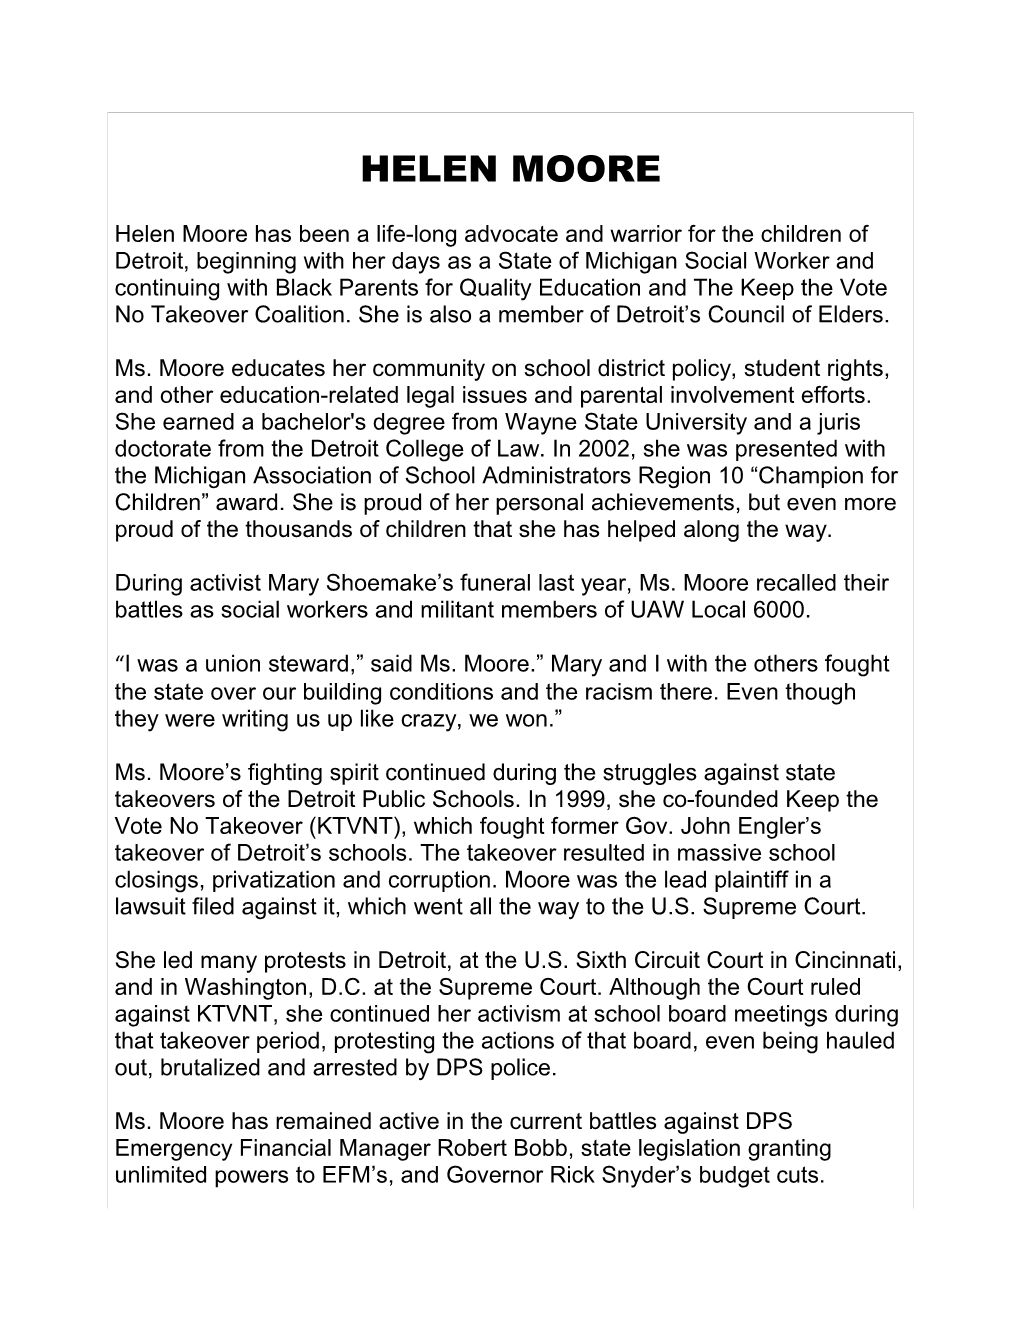 Helen Moore Has Been a Life-Long Advocate and Warrior for the Children of Detroit, Beginning